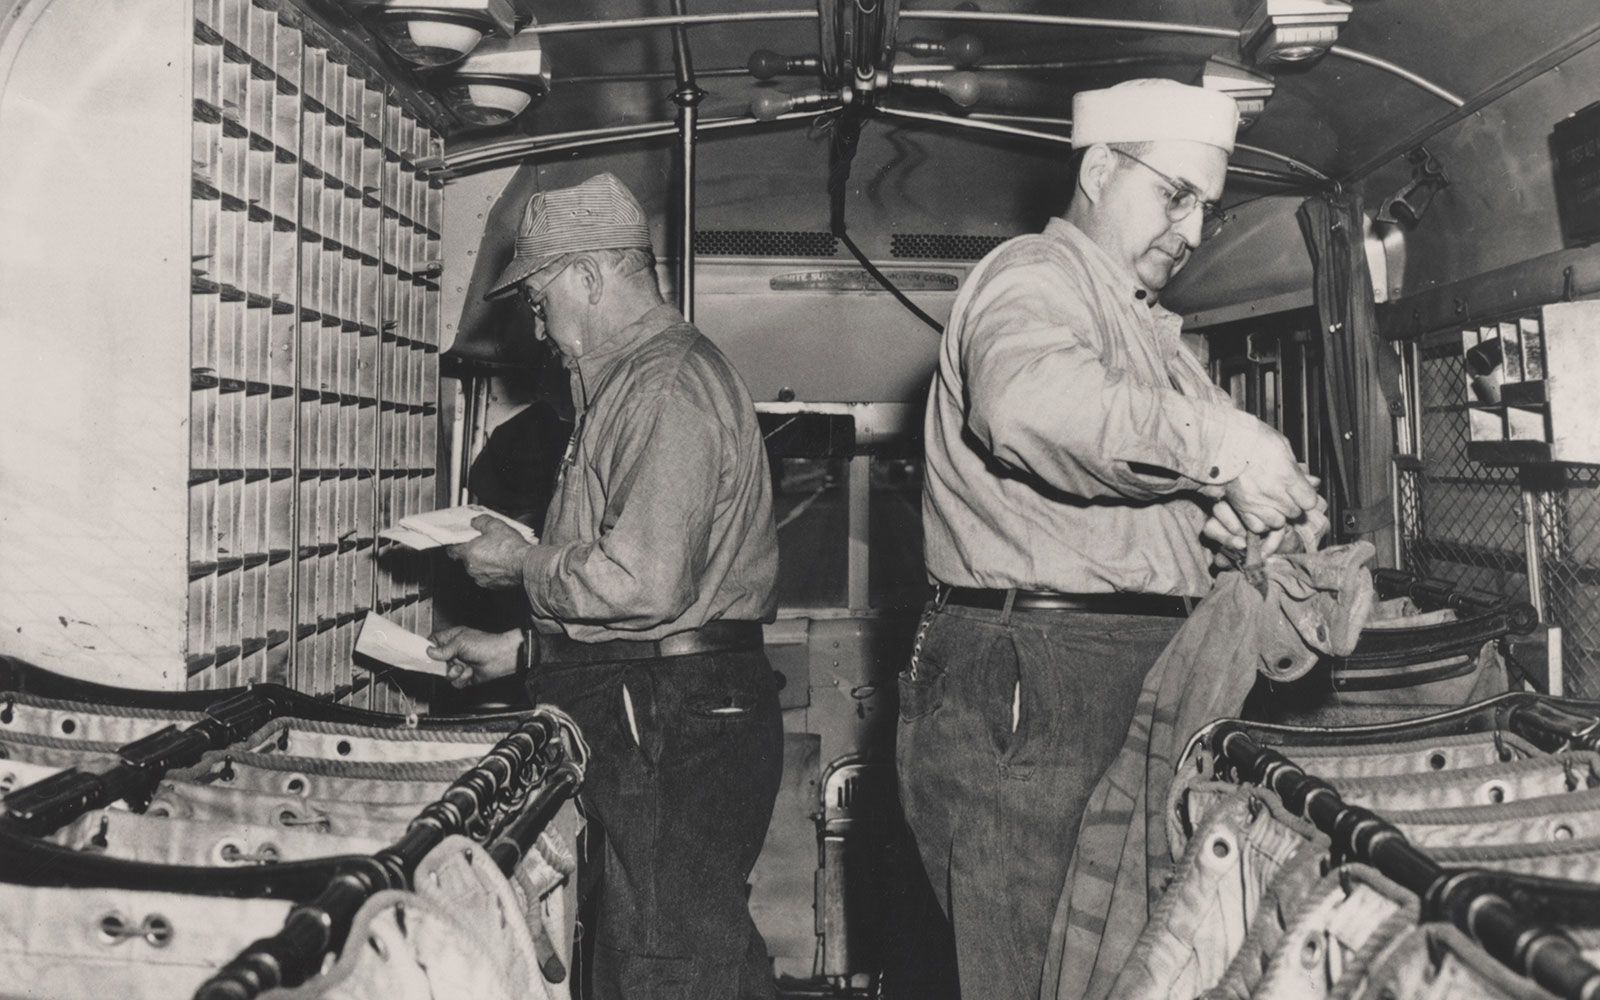 Two clerks sort mail inside the first Highway Post Office bus, which ran from Washington, D.C. to Harrisonburg, Va., during its inaugural year: 1941.